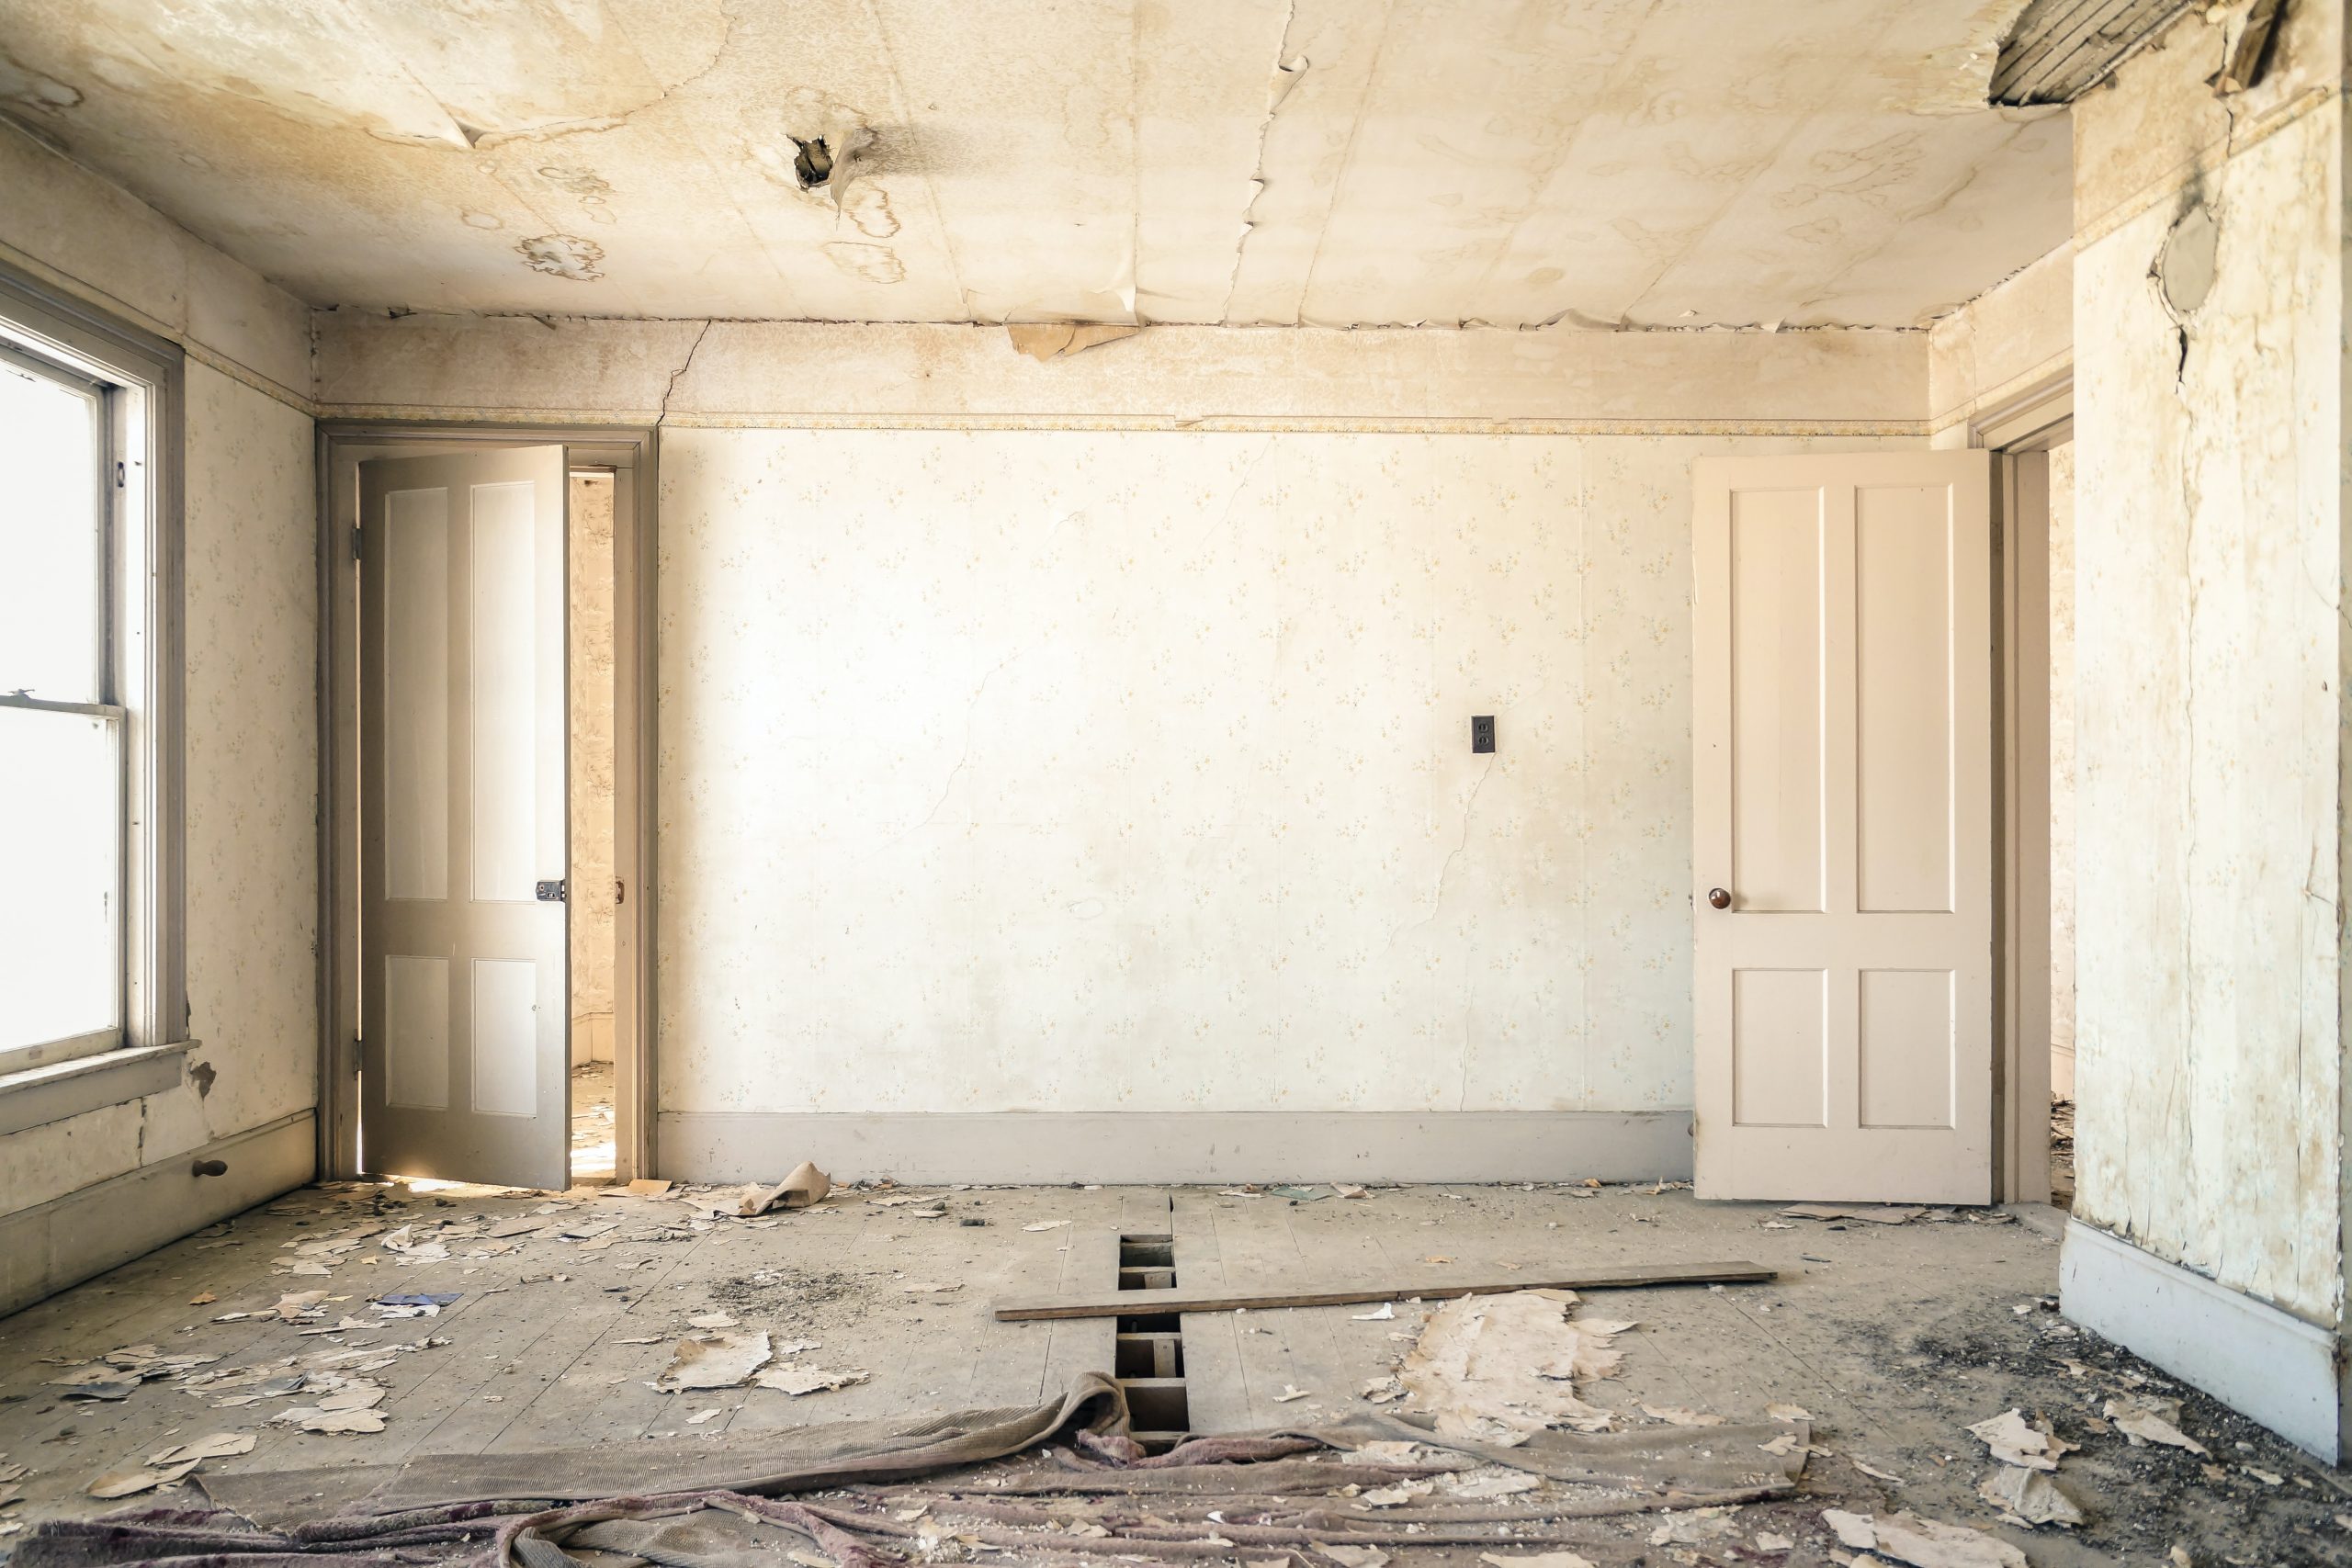 Starter House Or Fixer Upper: How To Pick What’s Best For You?